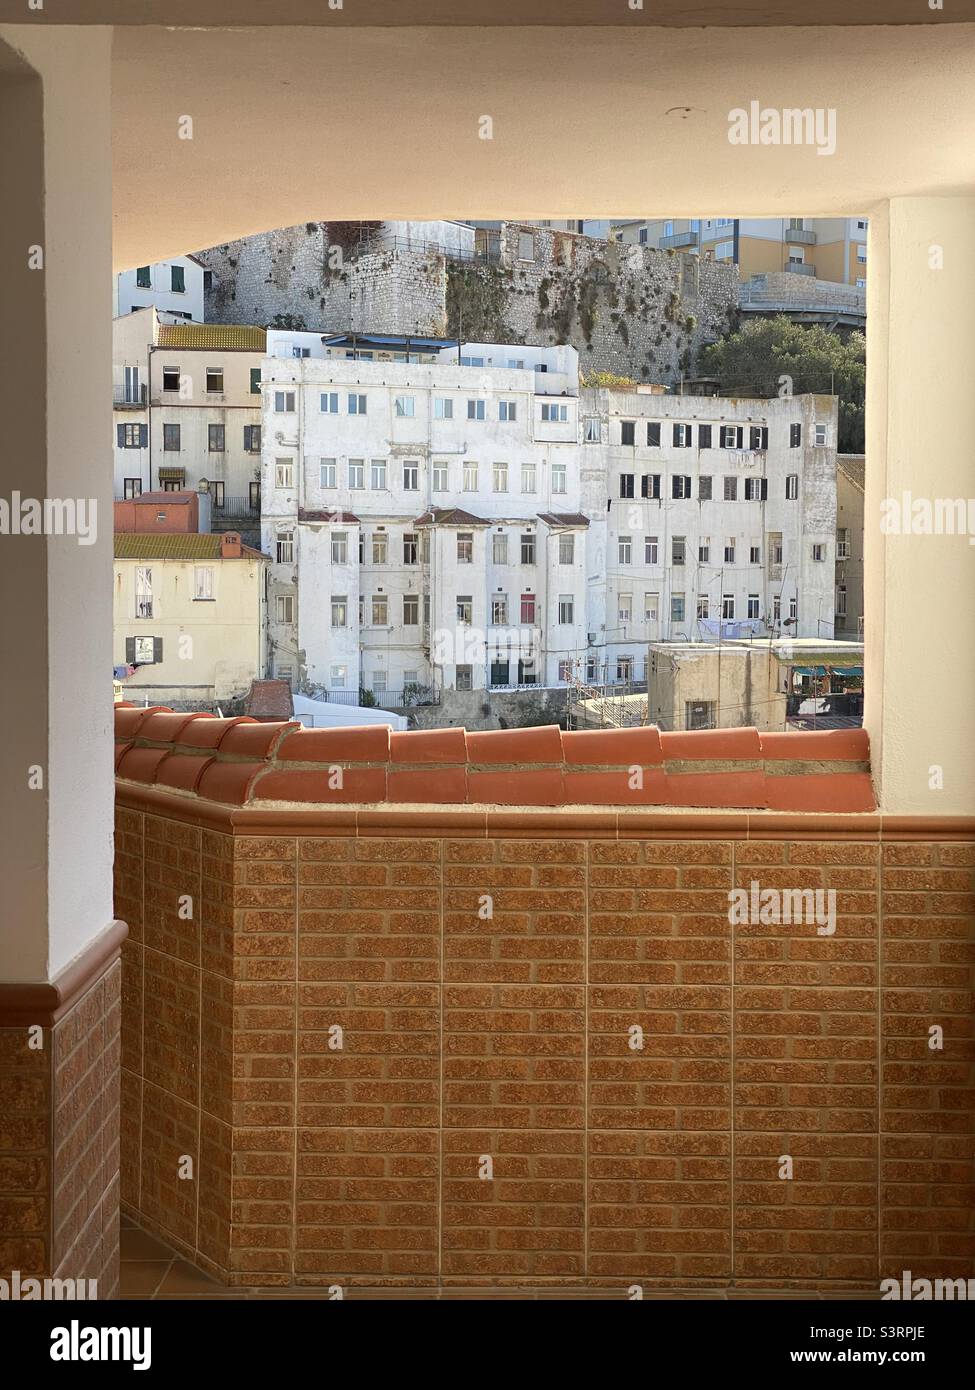 Part of Gibraltar old town seen from an open terrace Stock Photo